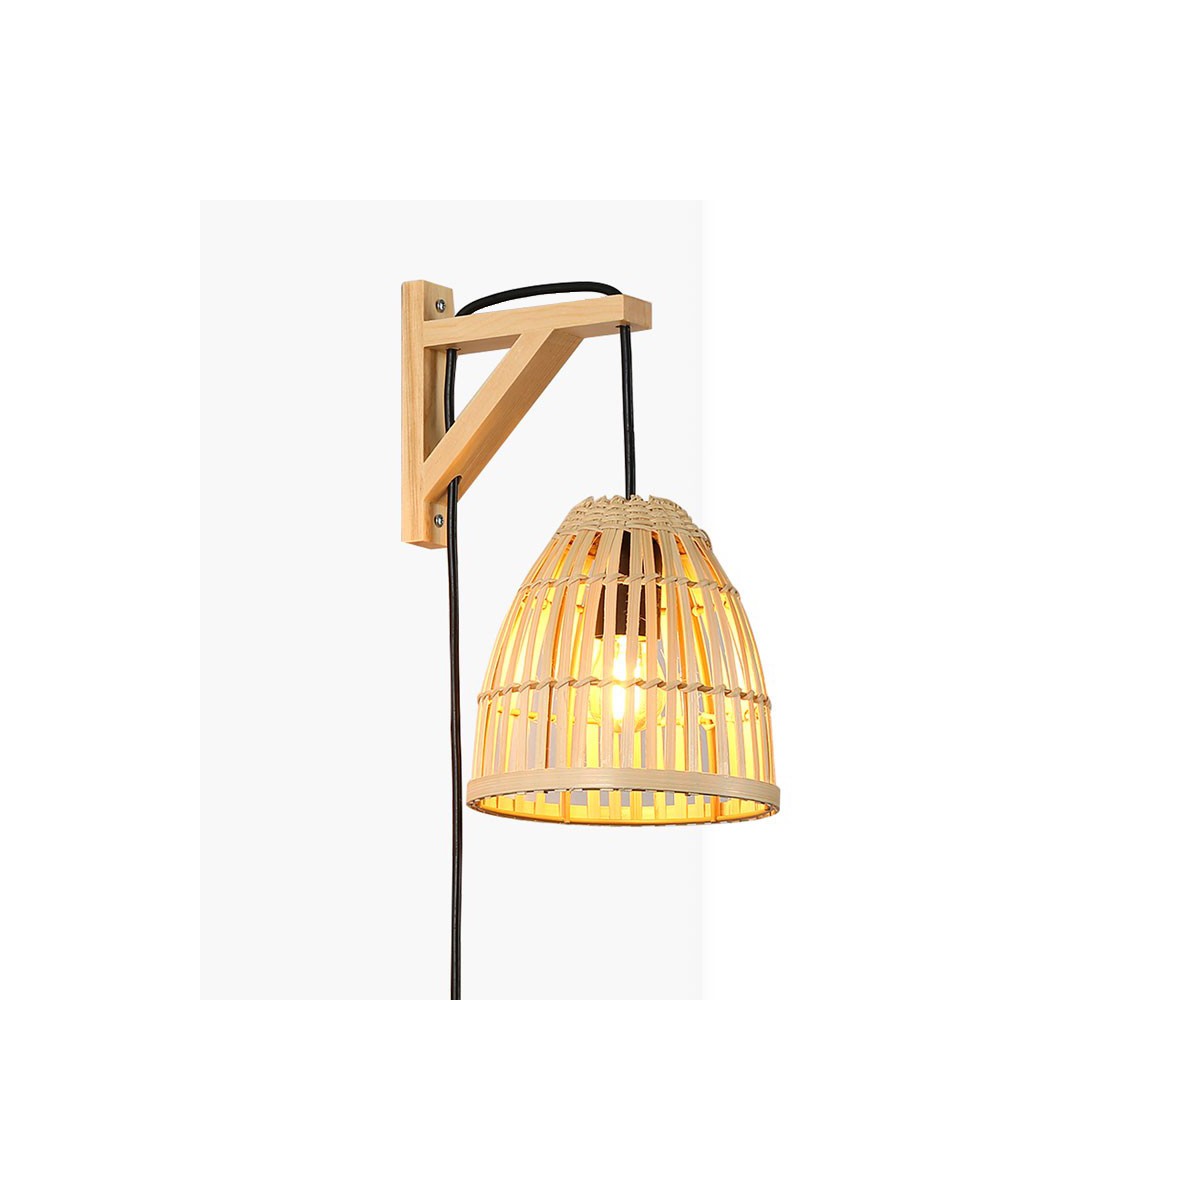 Wall lamp "CESTA" in natural wood.  E27